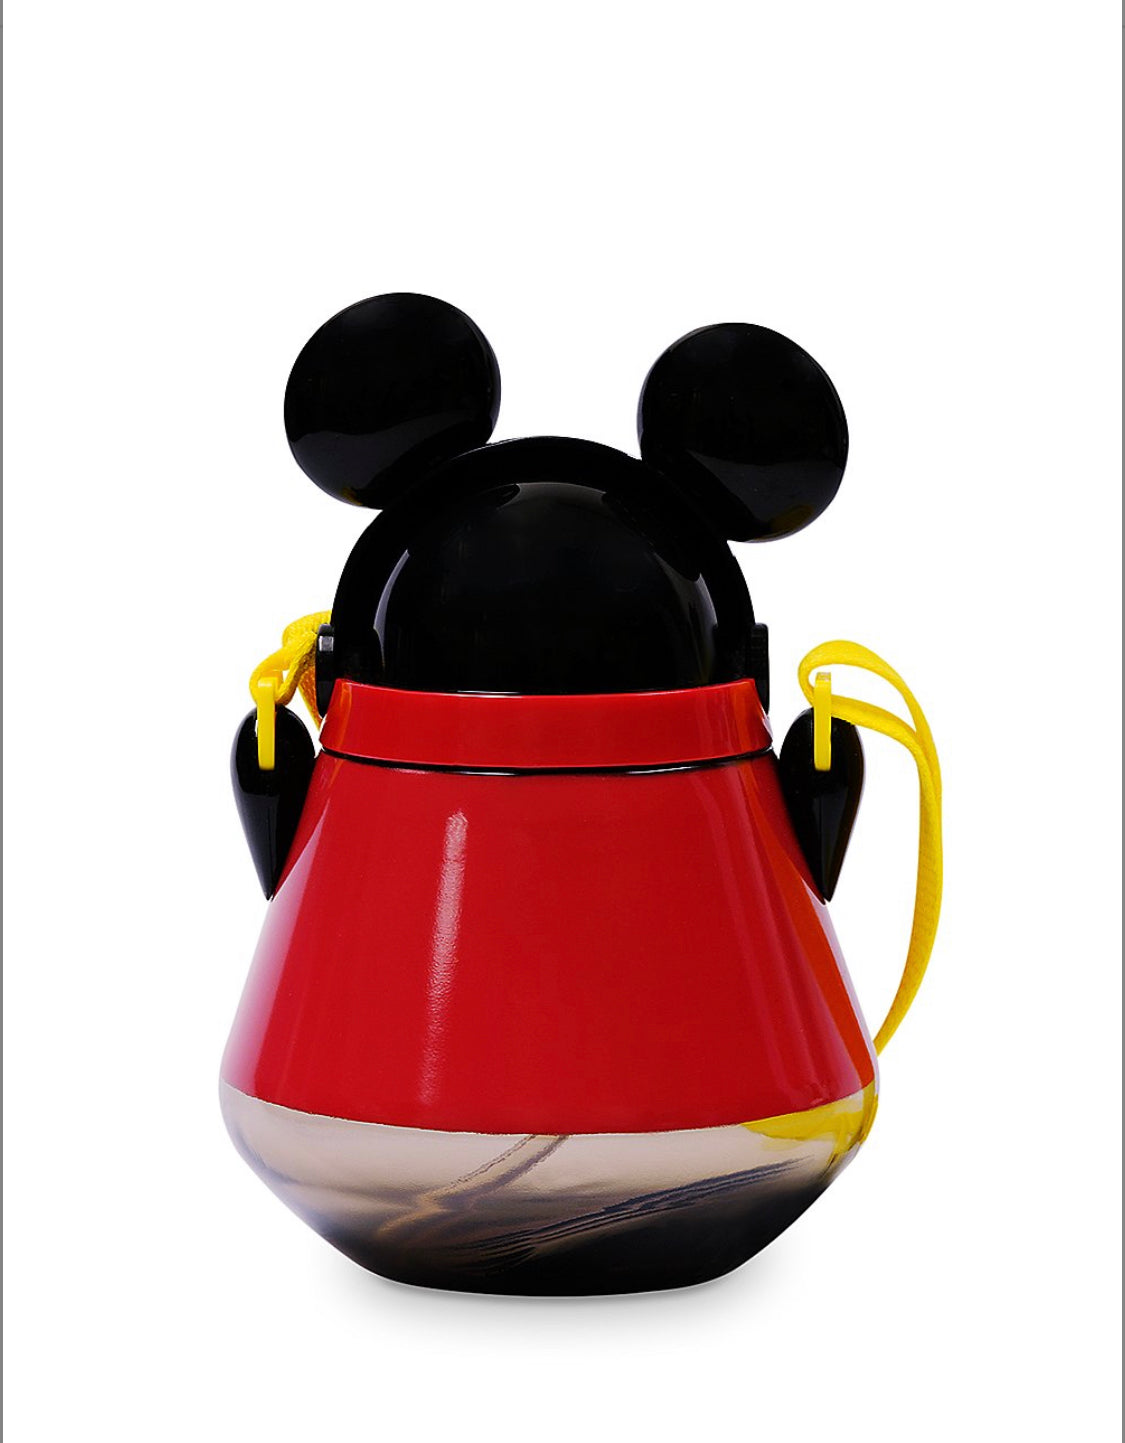 Mickey Mouse Flip Flop Canteen